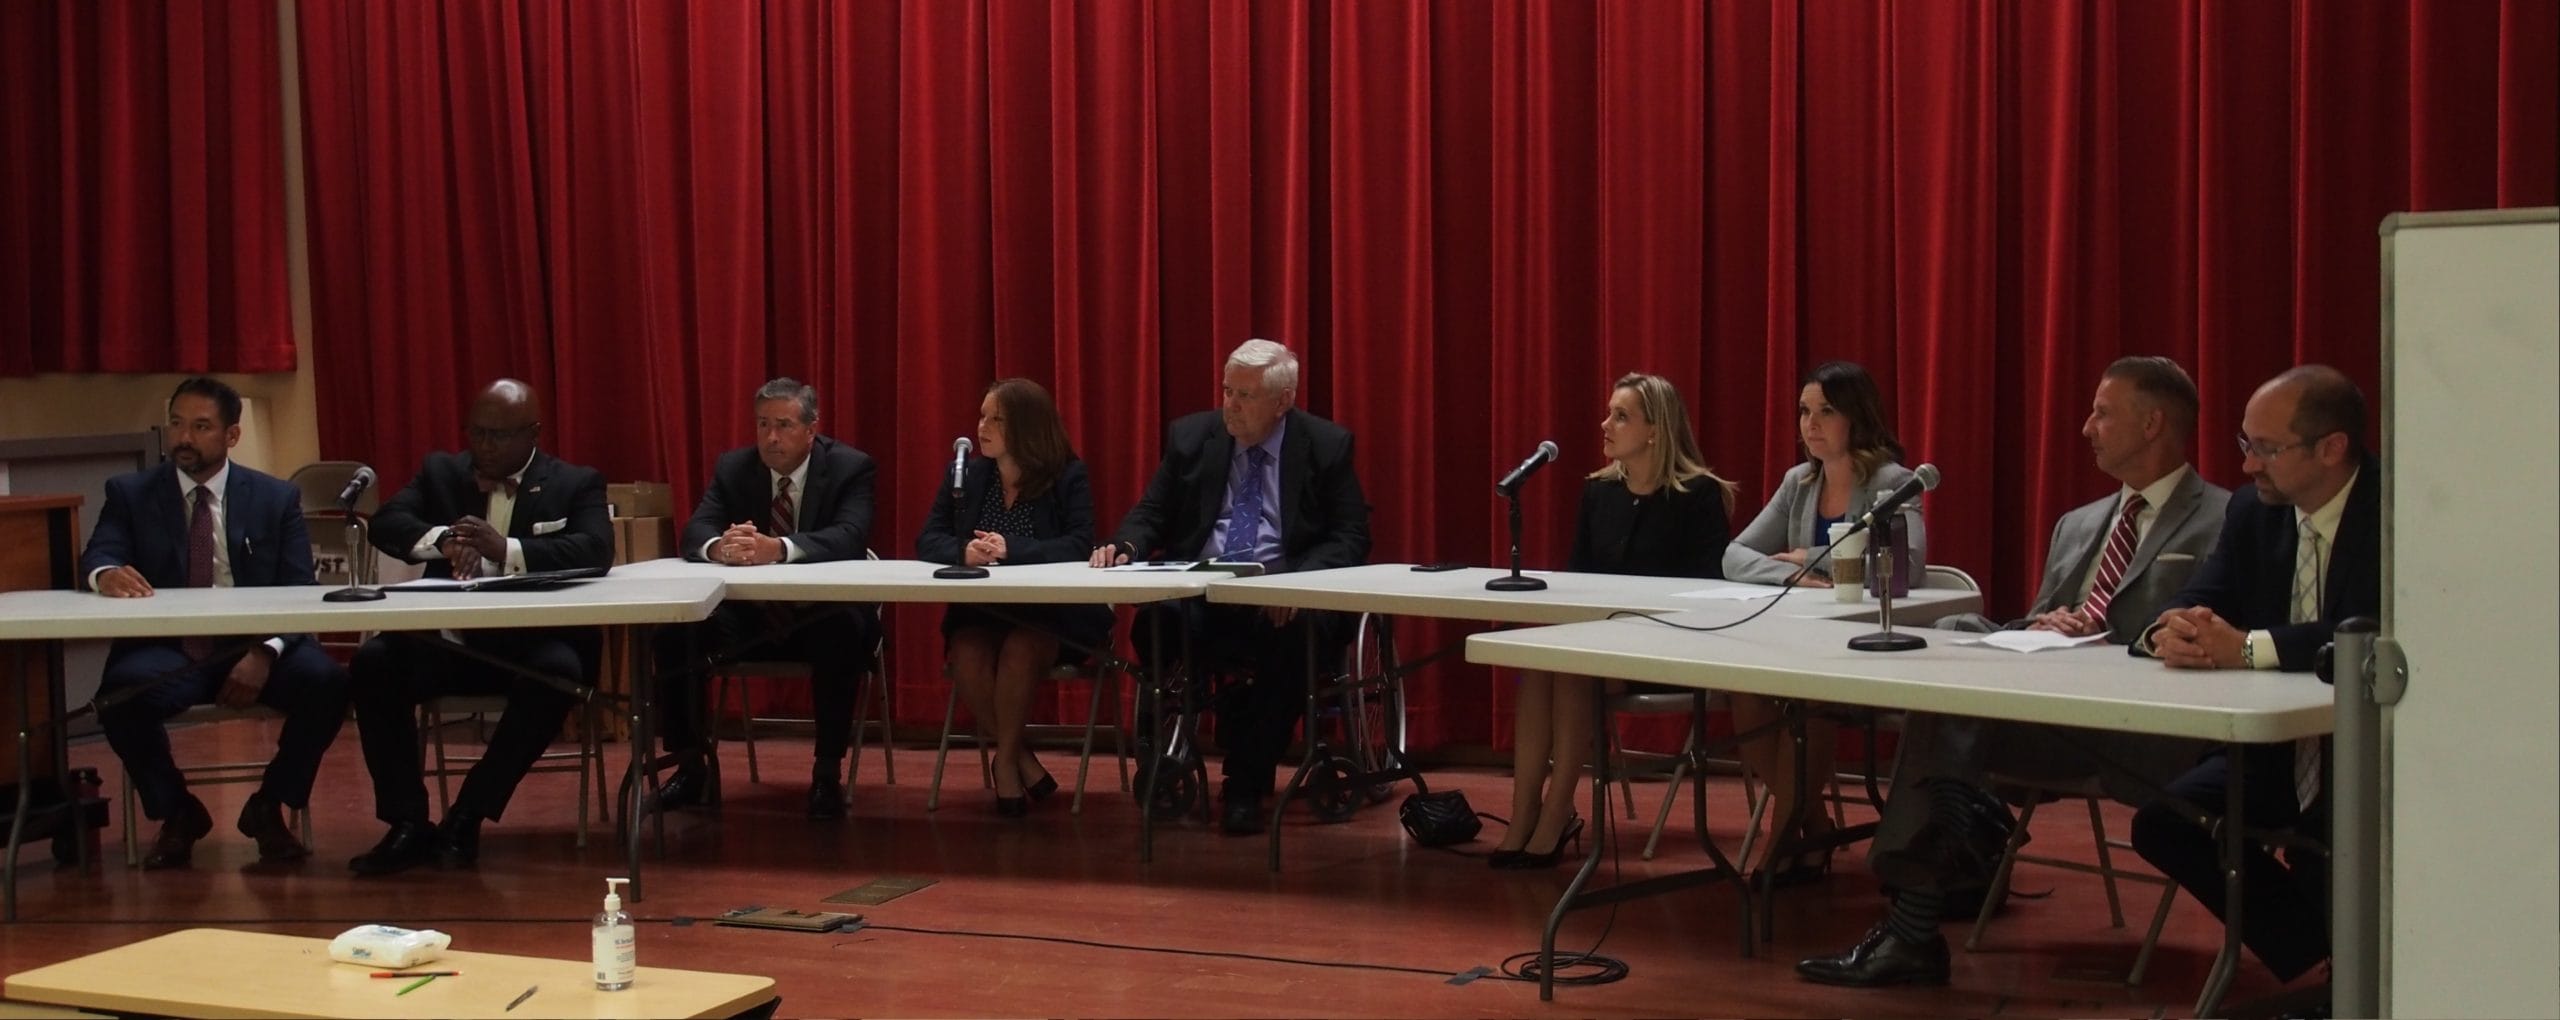 Candidate-forum footage creates informed and confident voting